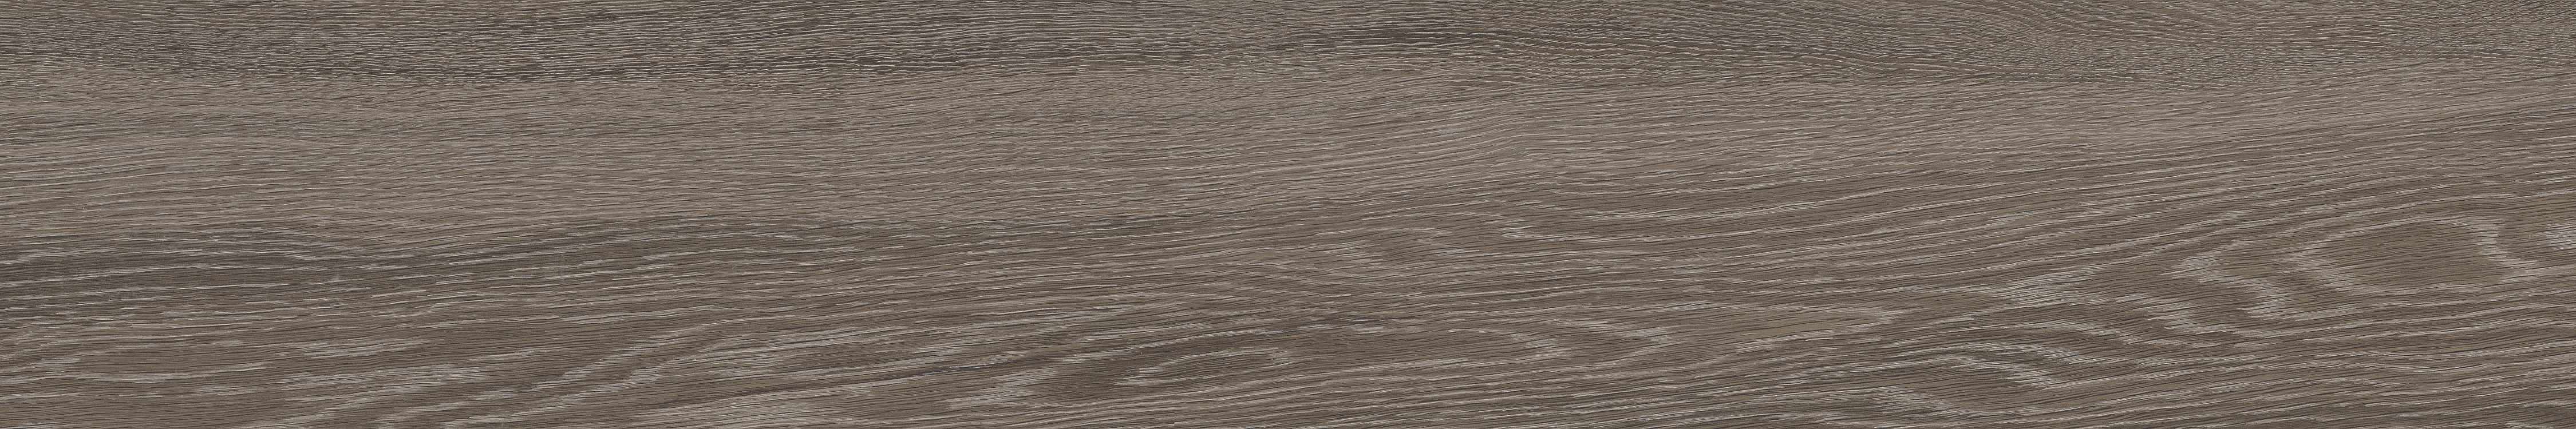 sequoia pattern glazed porcelain field tile from aspen anatolia collection distributed by surface group international matte finish rectified edge 8x48 rectangle shape